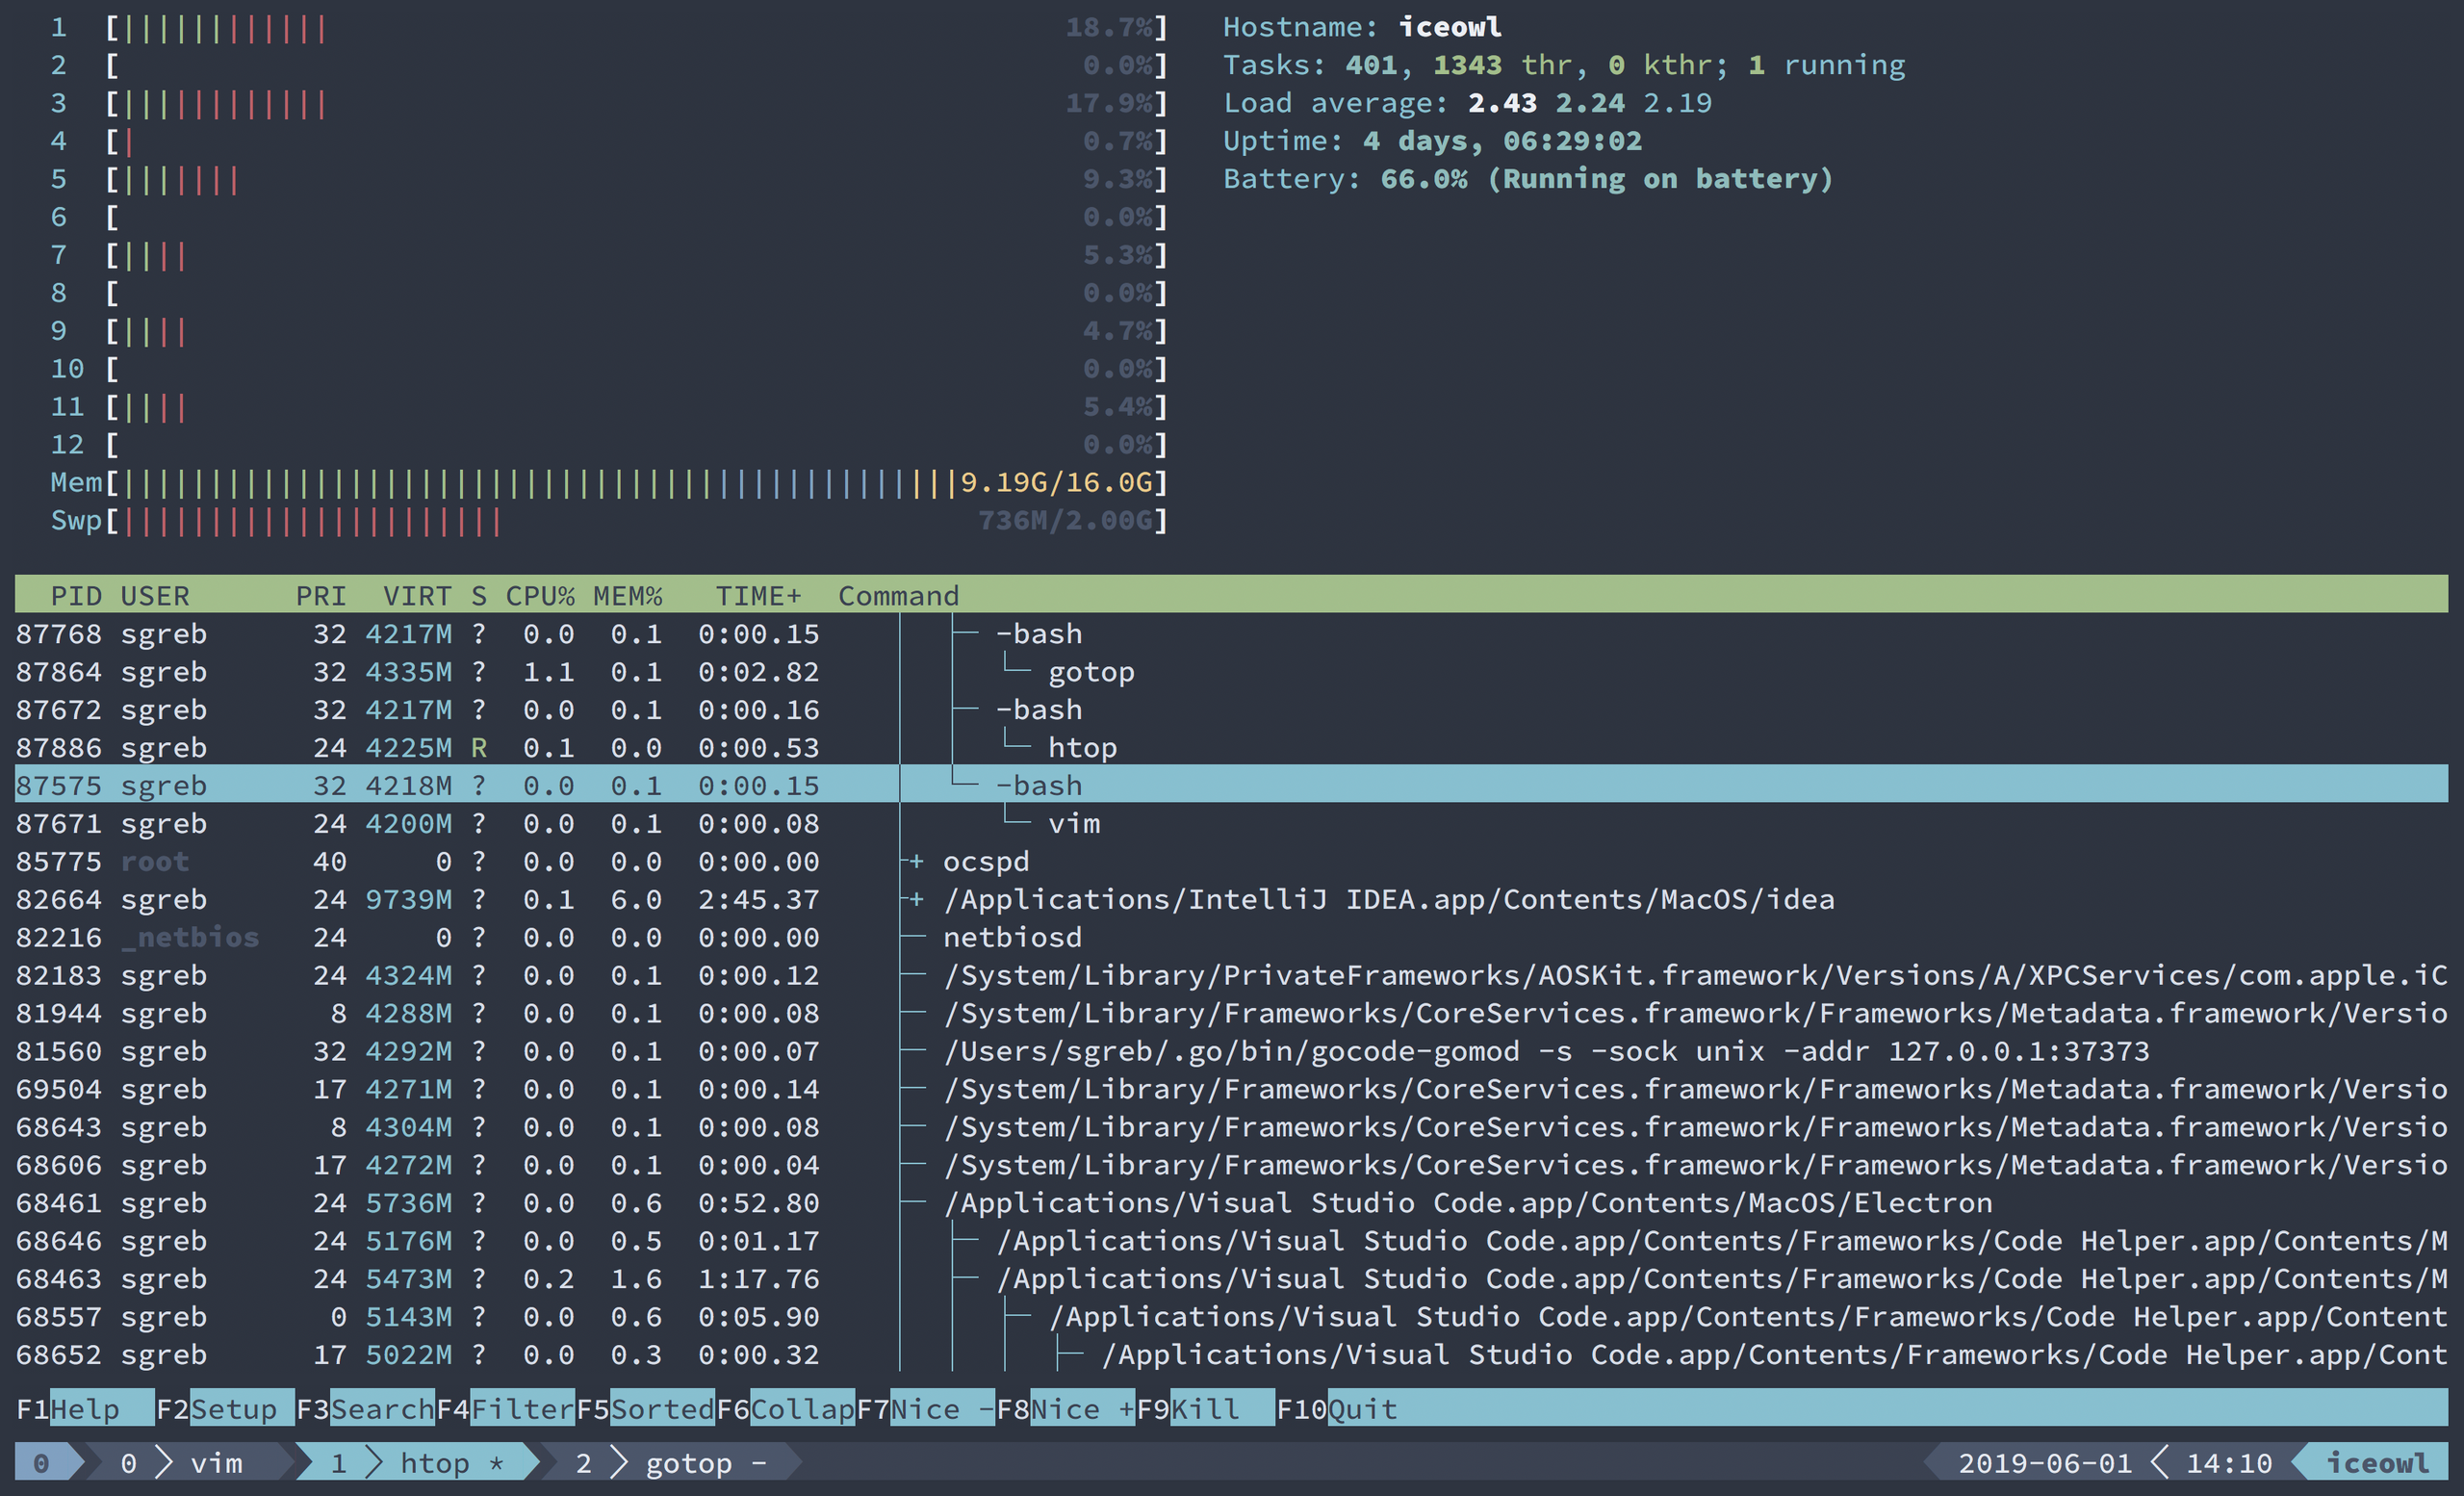 Screenshot showing a fluidly merged UI of tmux with htop.